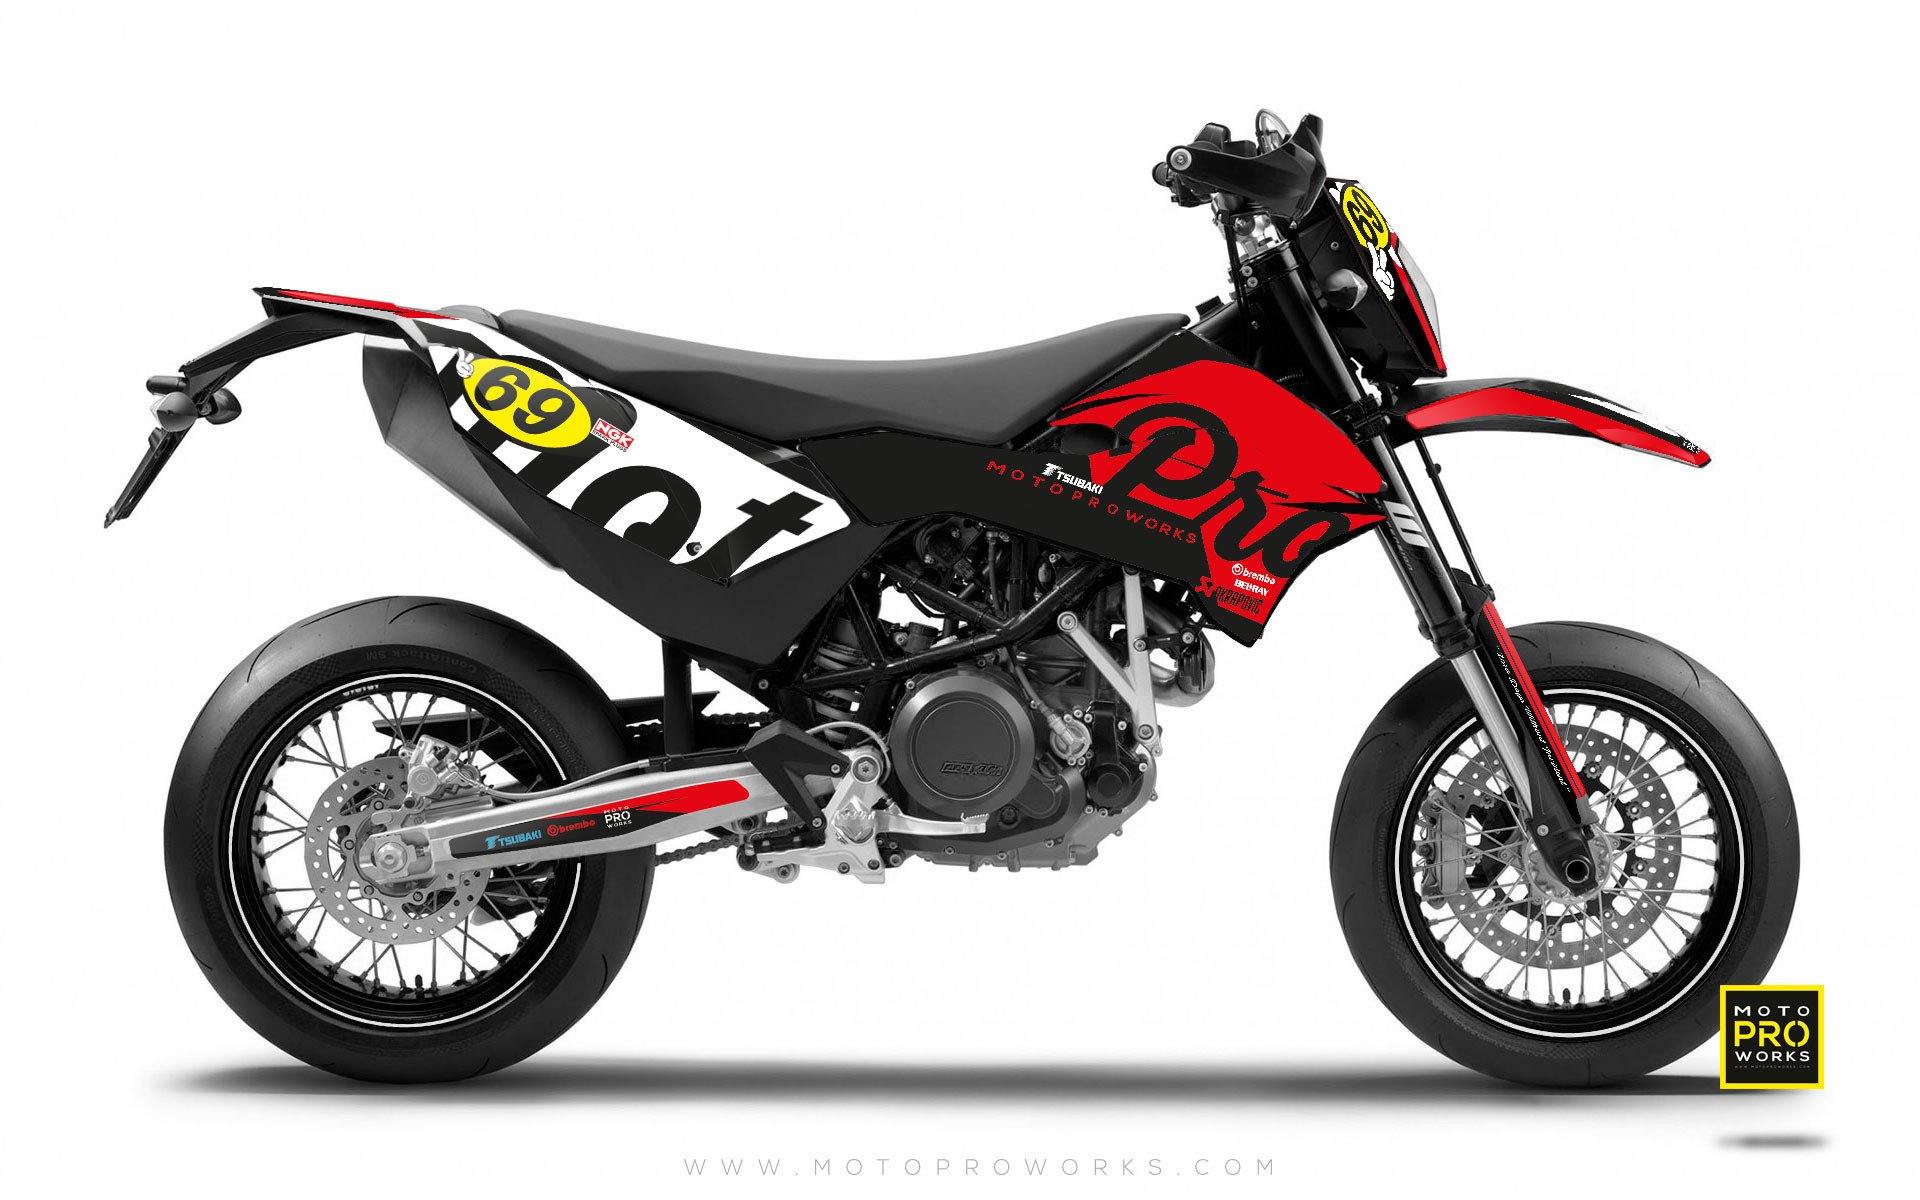 KTM GRAPHIC KIT - "MIDNIGHT" (red) - MotoProWorks | Decals and Bike Graphic kit